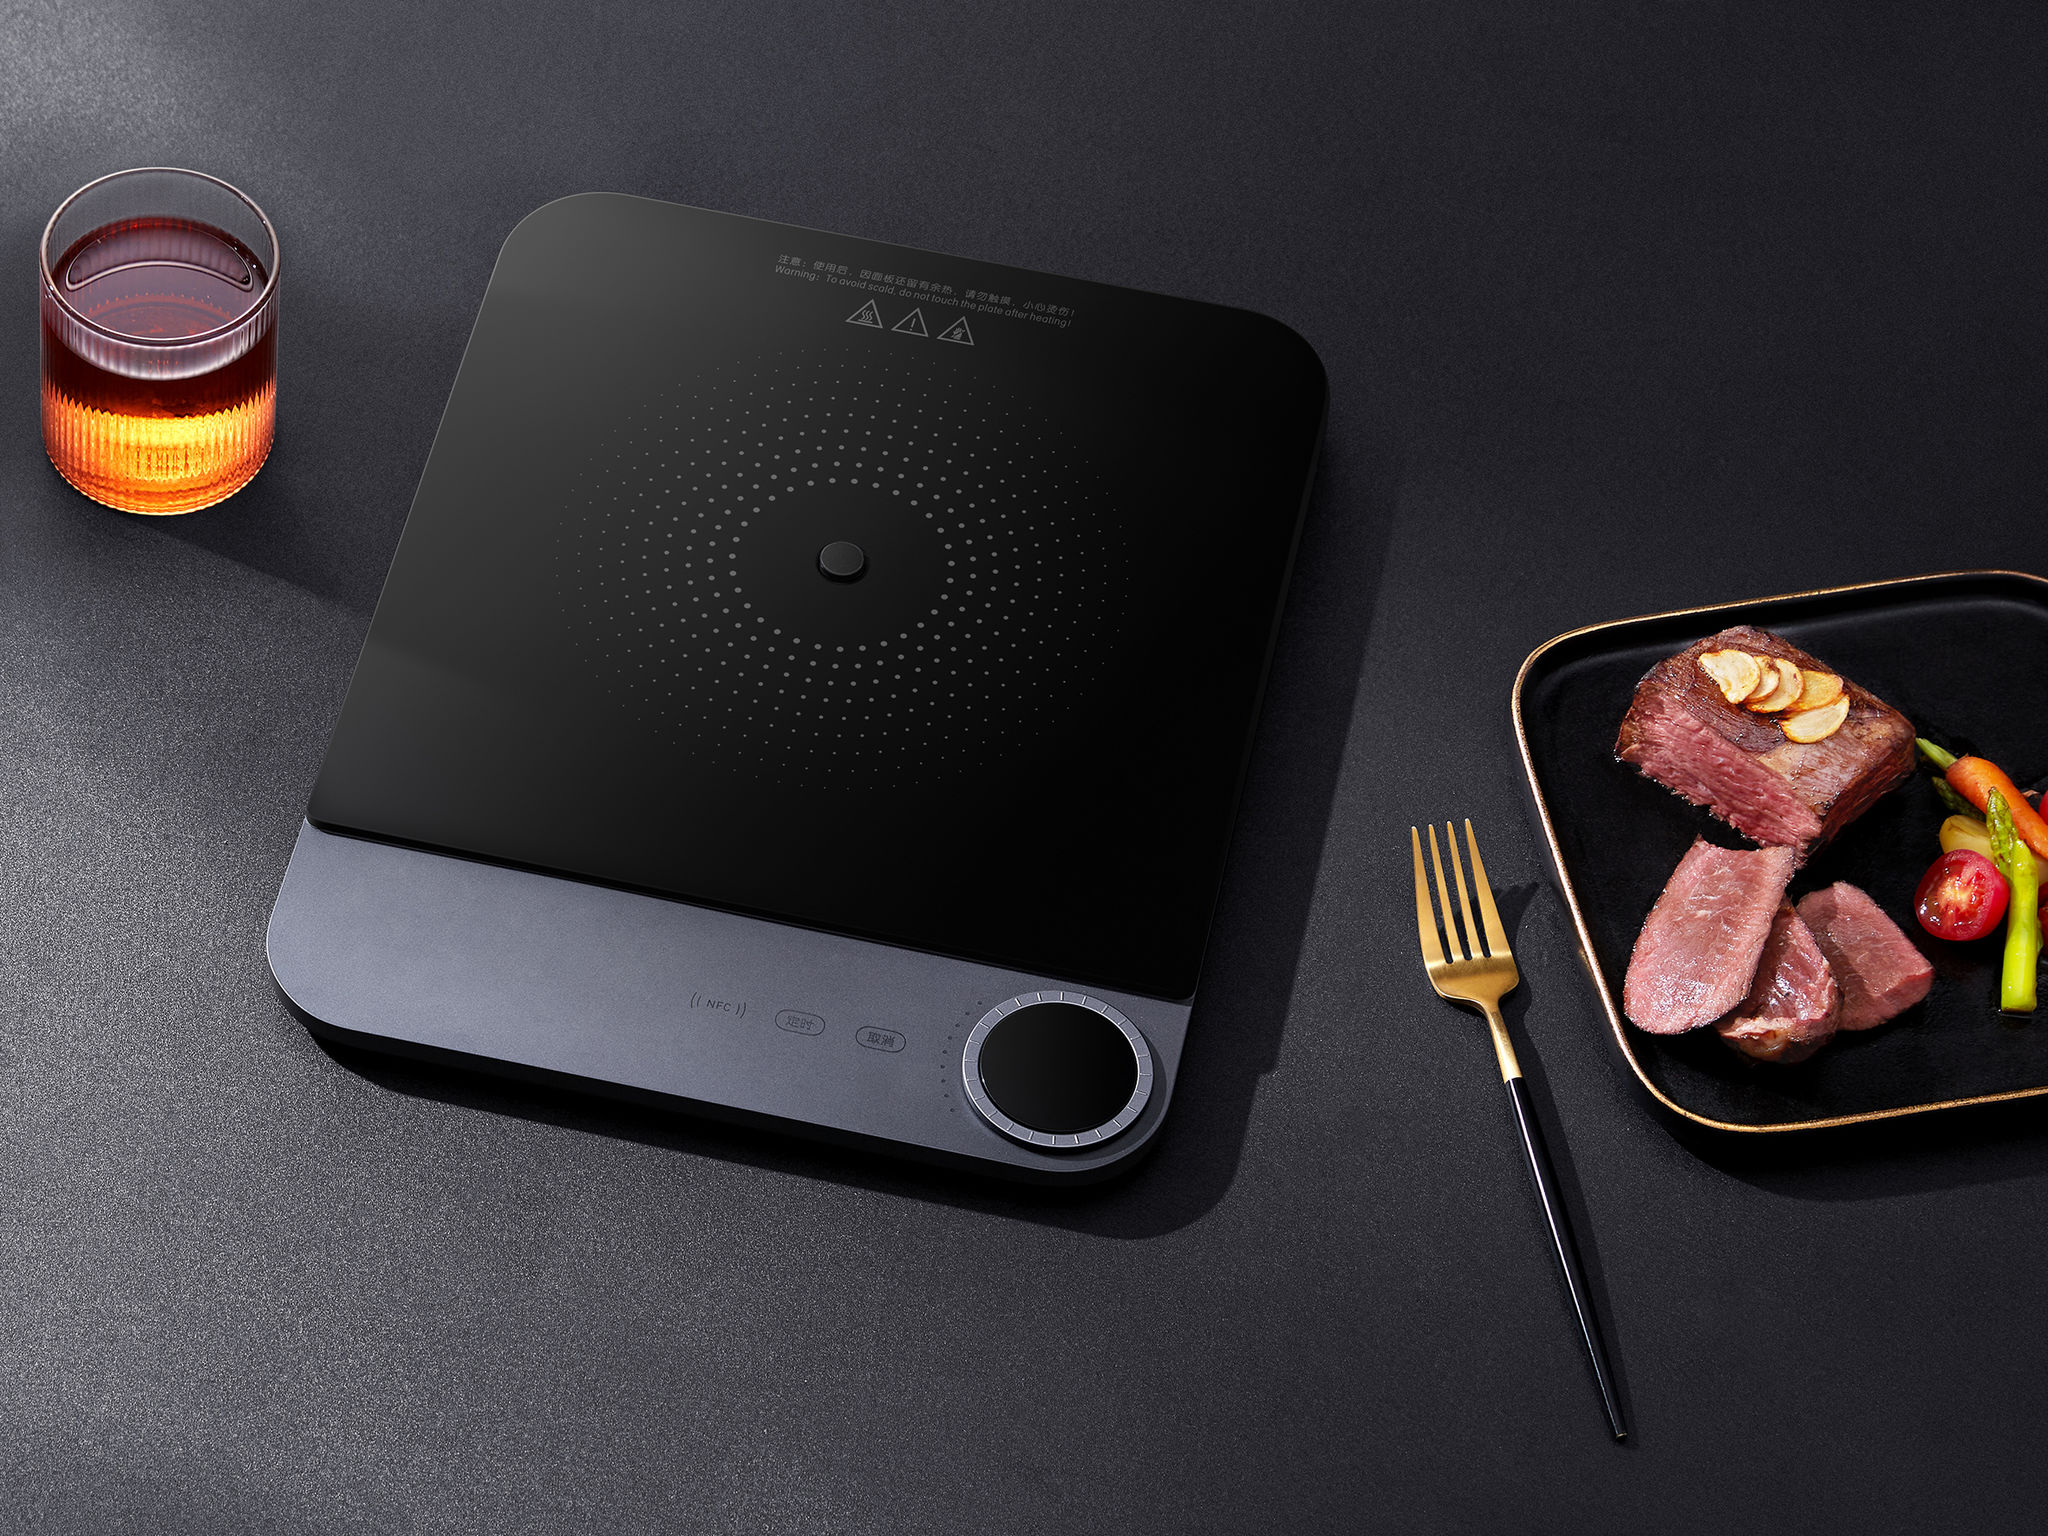 Mi Ultra-Thin Induction Cooker